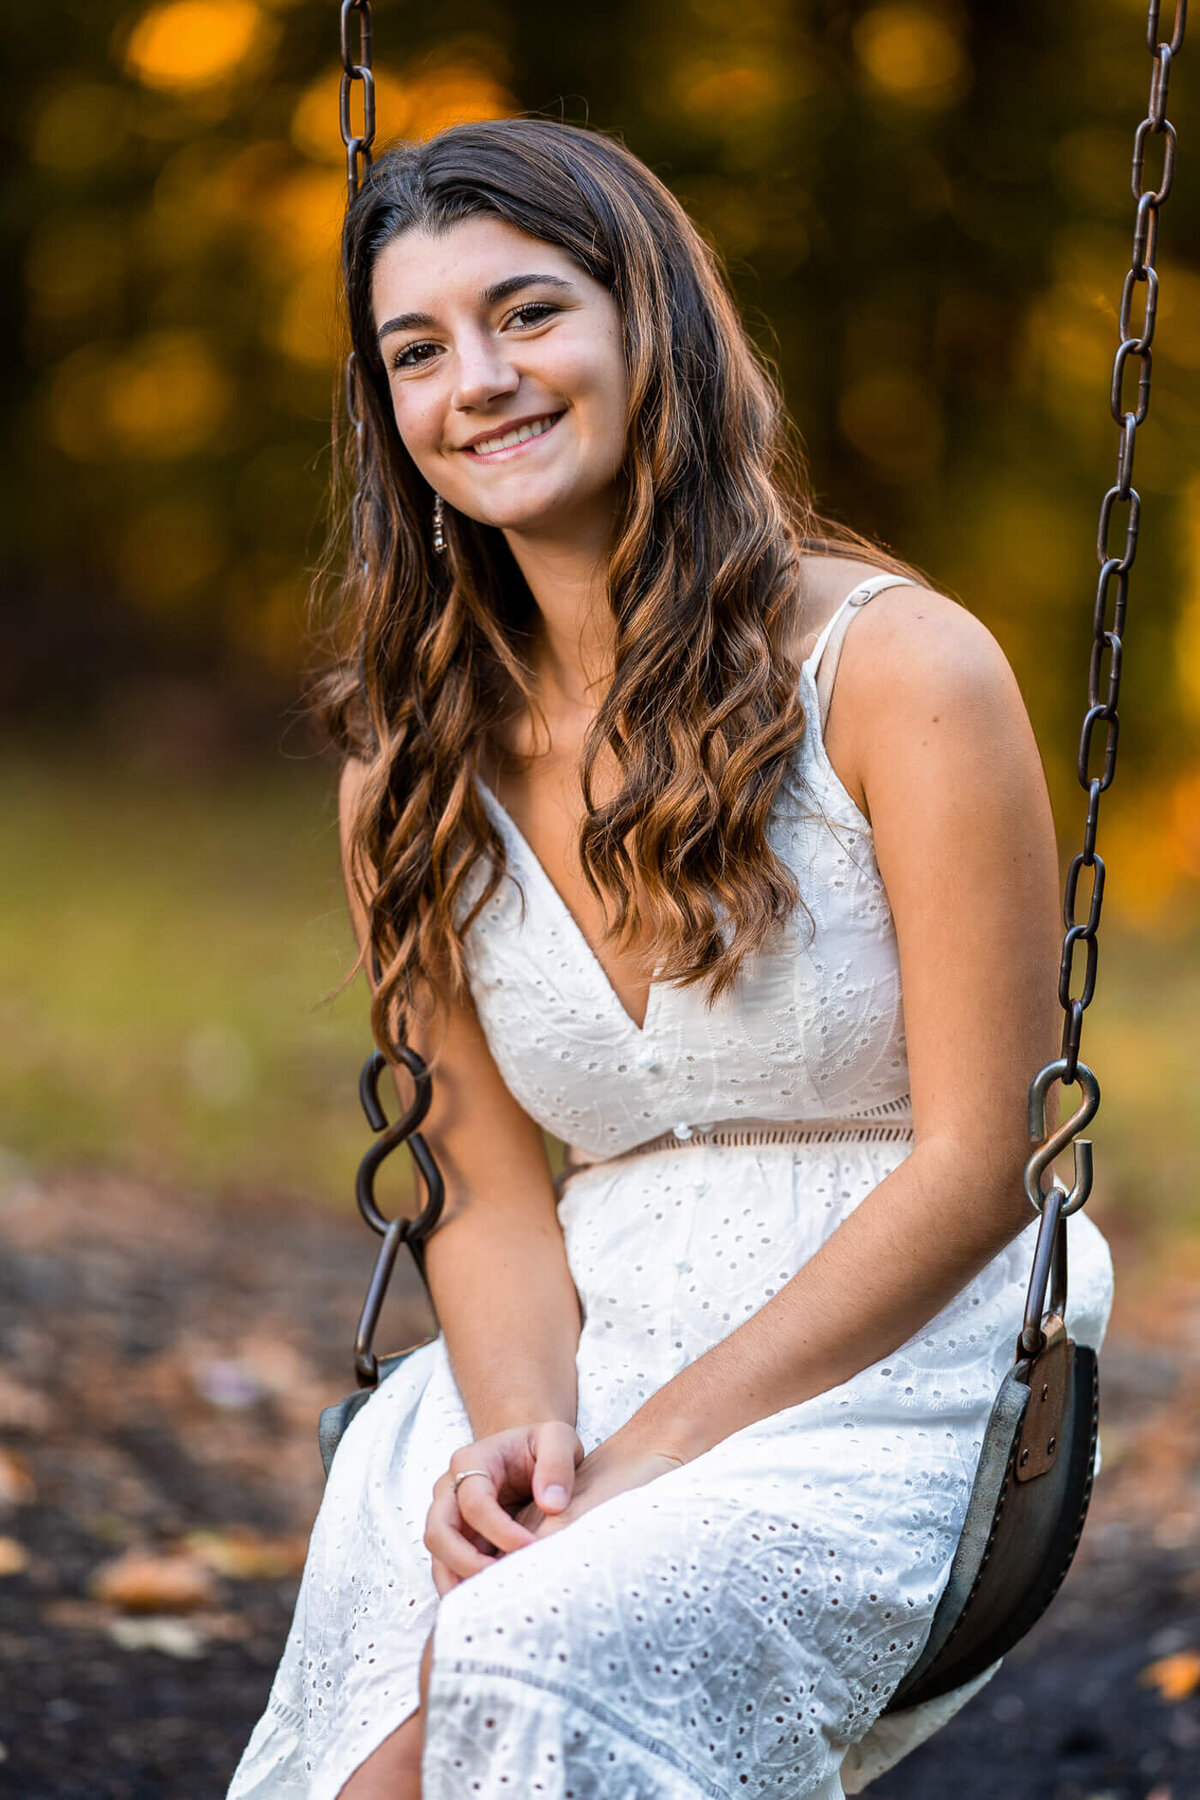 Senior portrait photography of a senior sitting on a swing set and smiling surrounded by autumn leaves